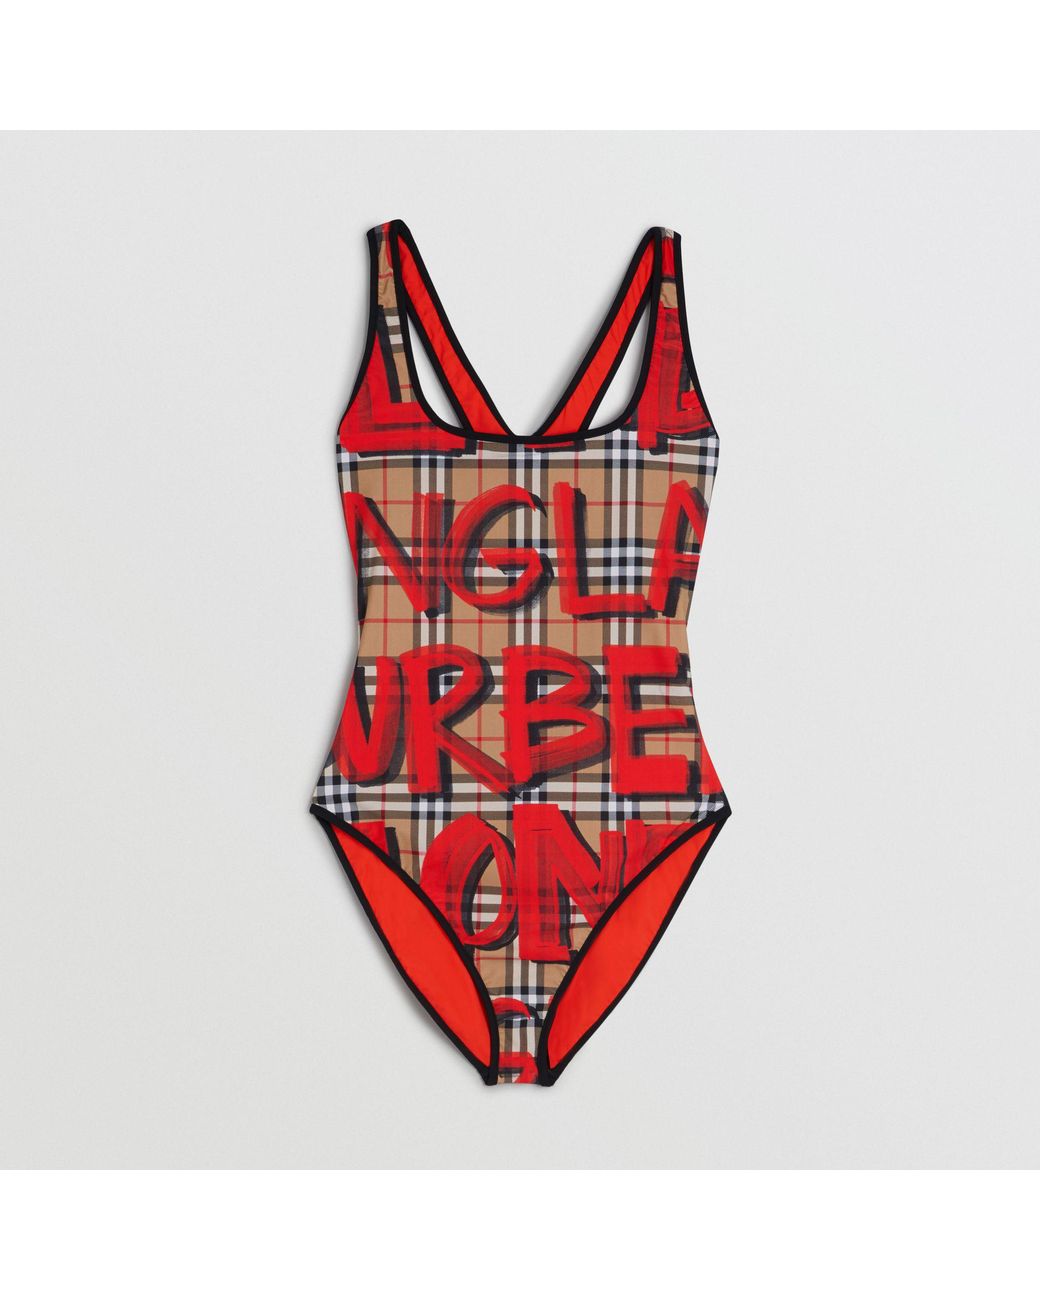 Burberry Graffiti Print Vintage Check Swimsuit in Red | Lyst